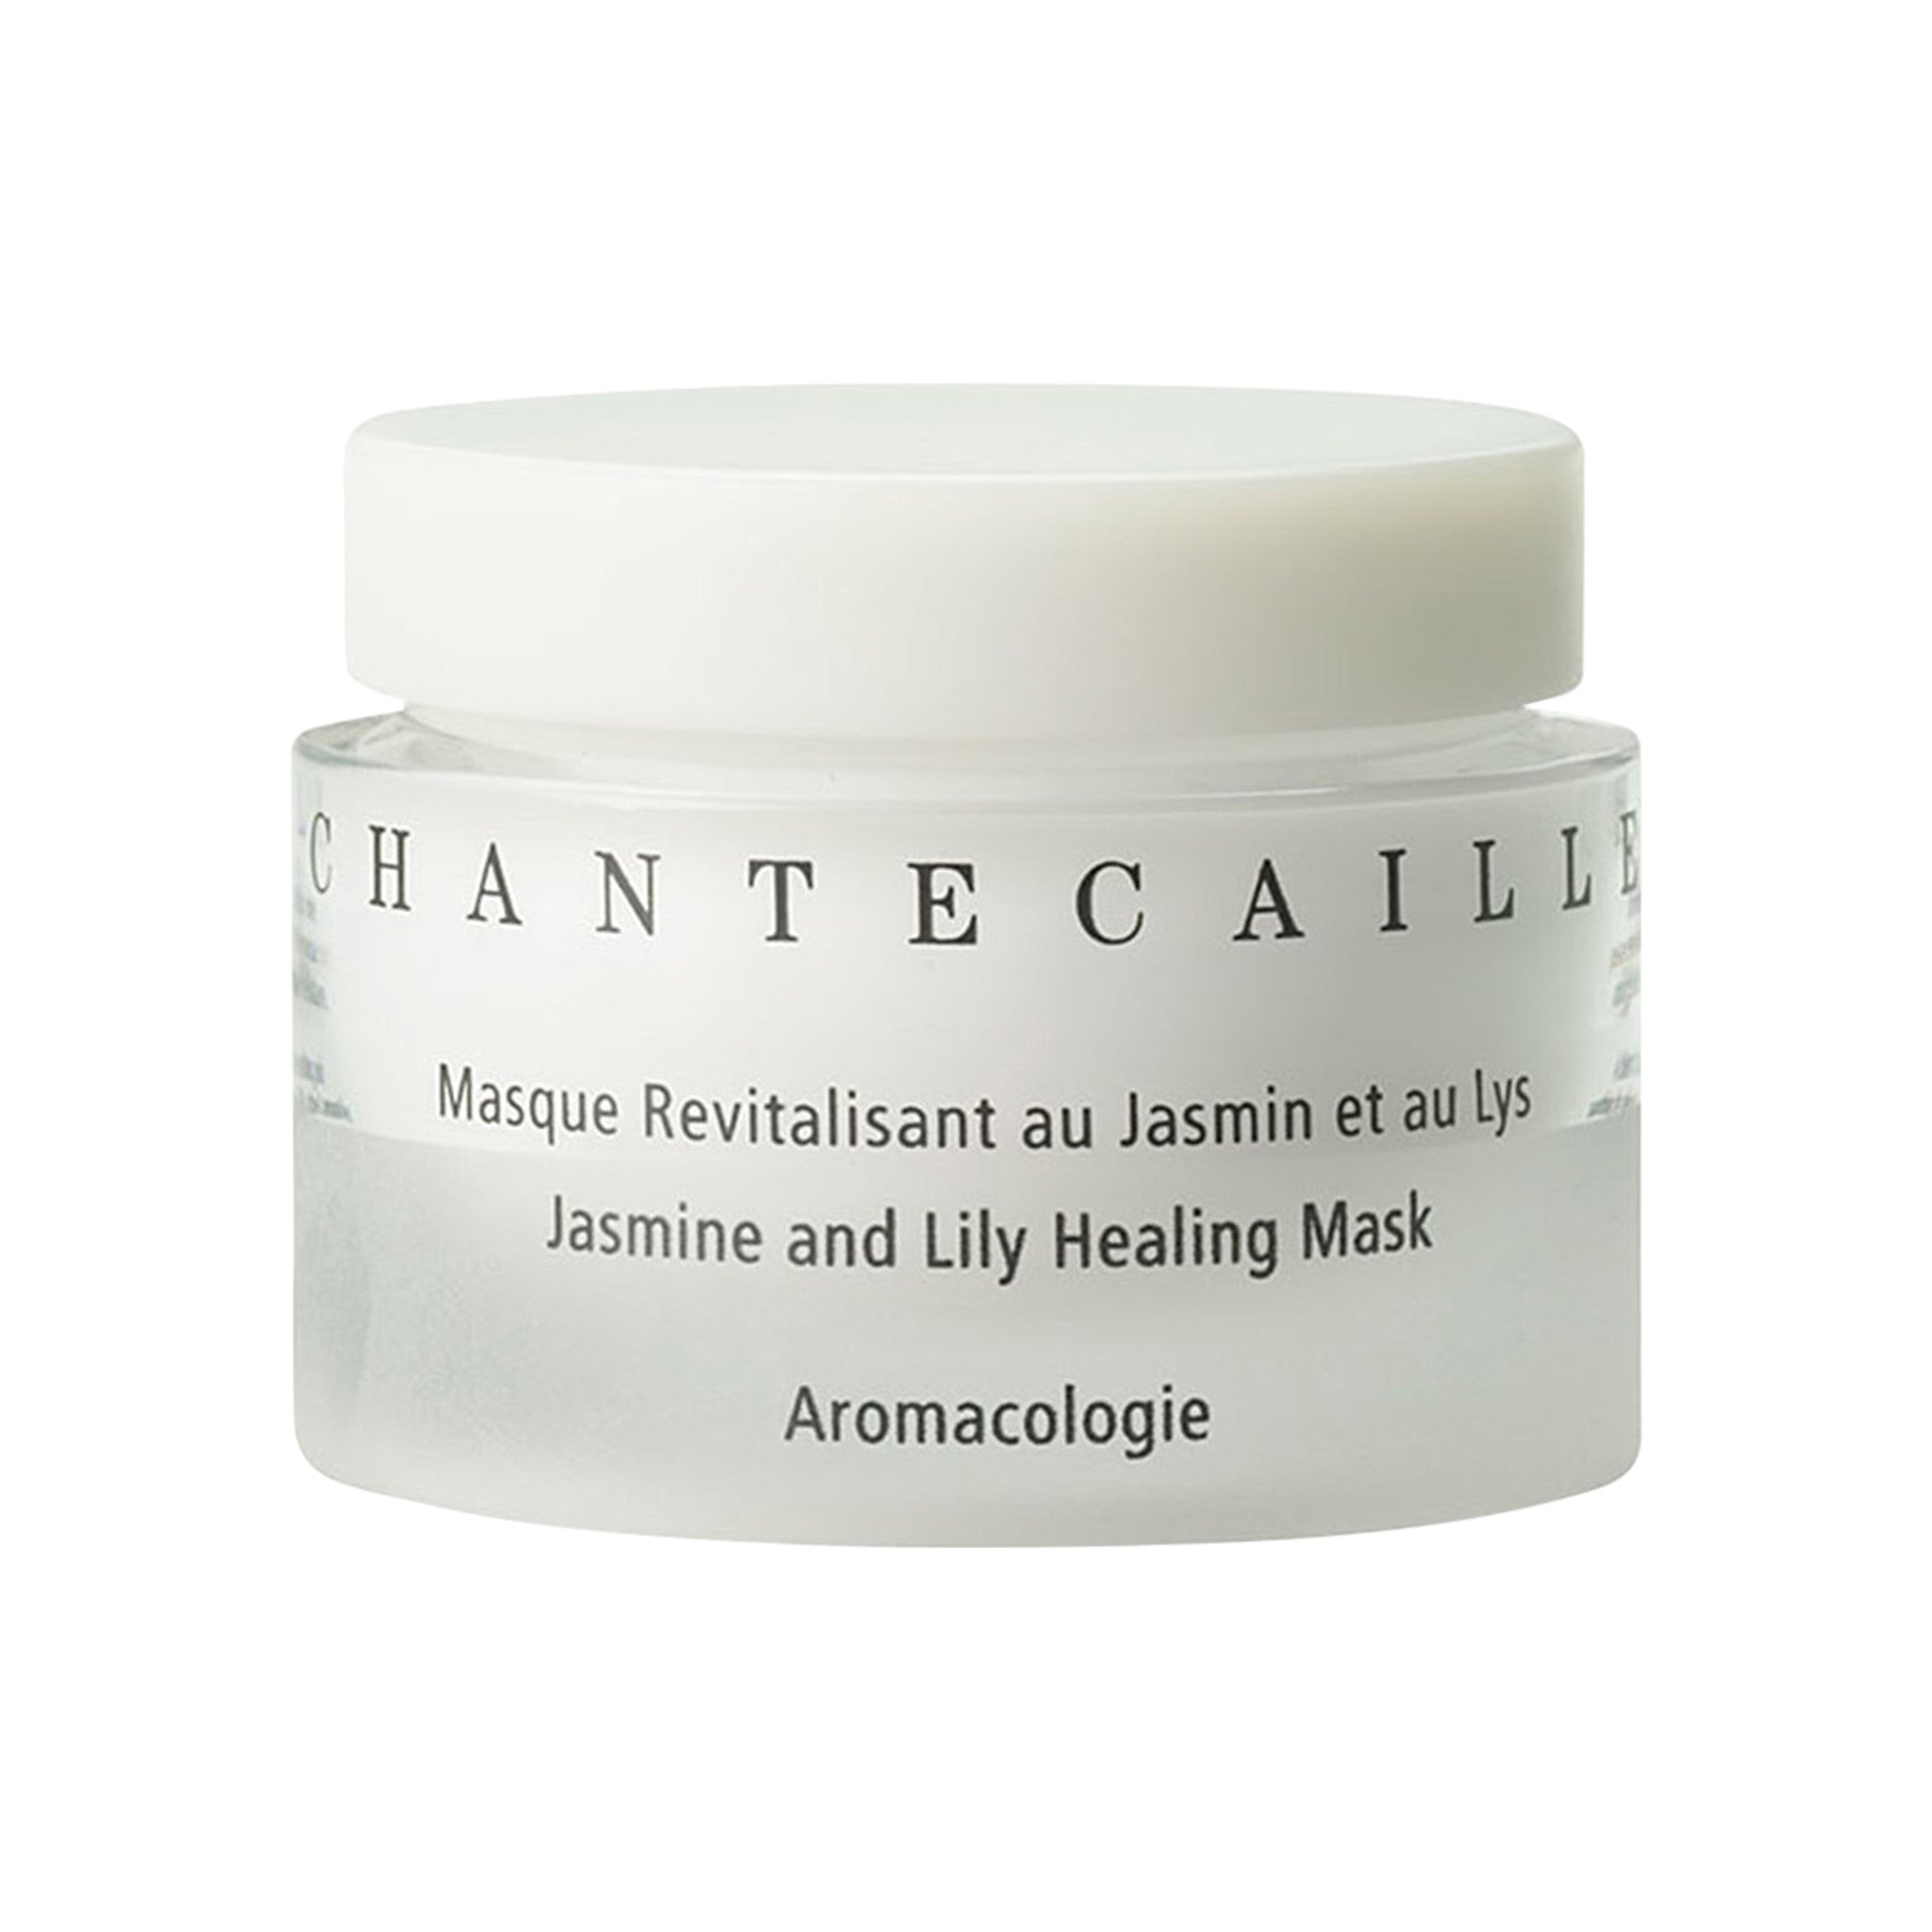 Chantecaille Jasmine and Lily Healing Mask main image.